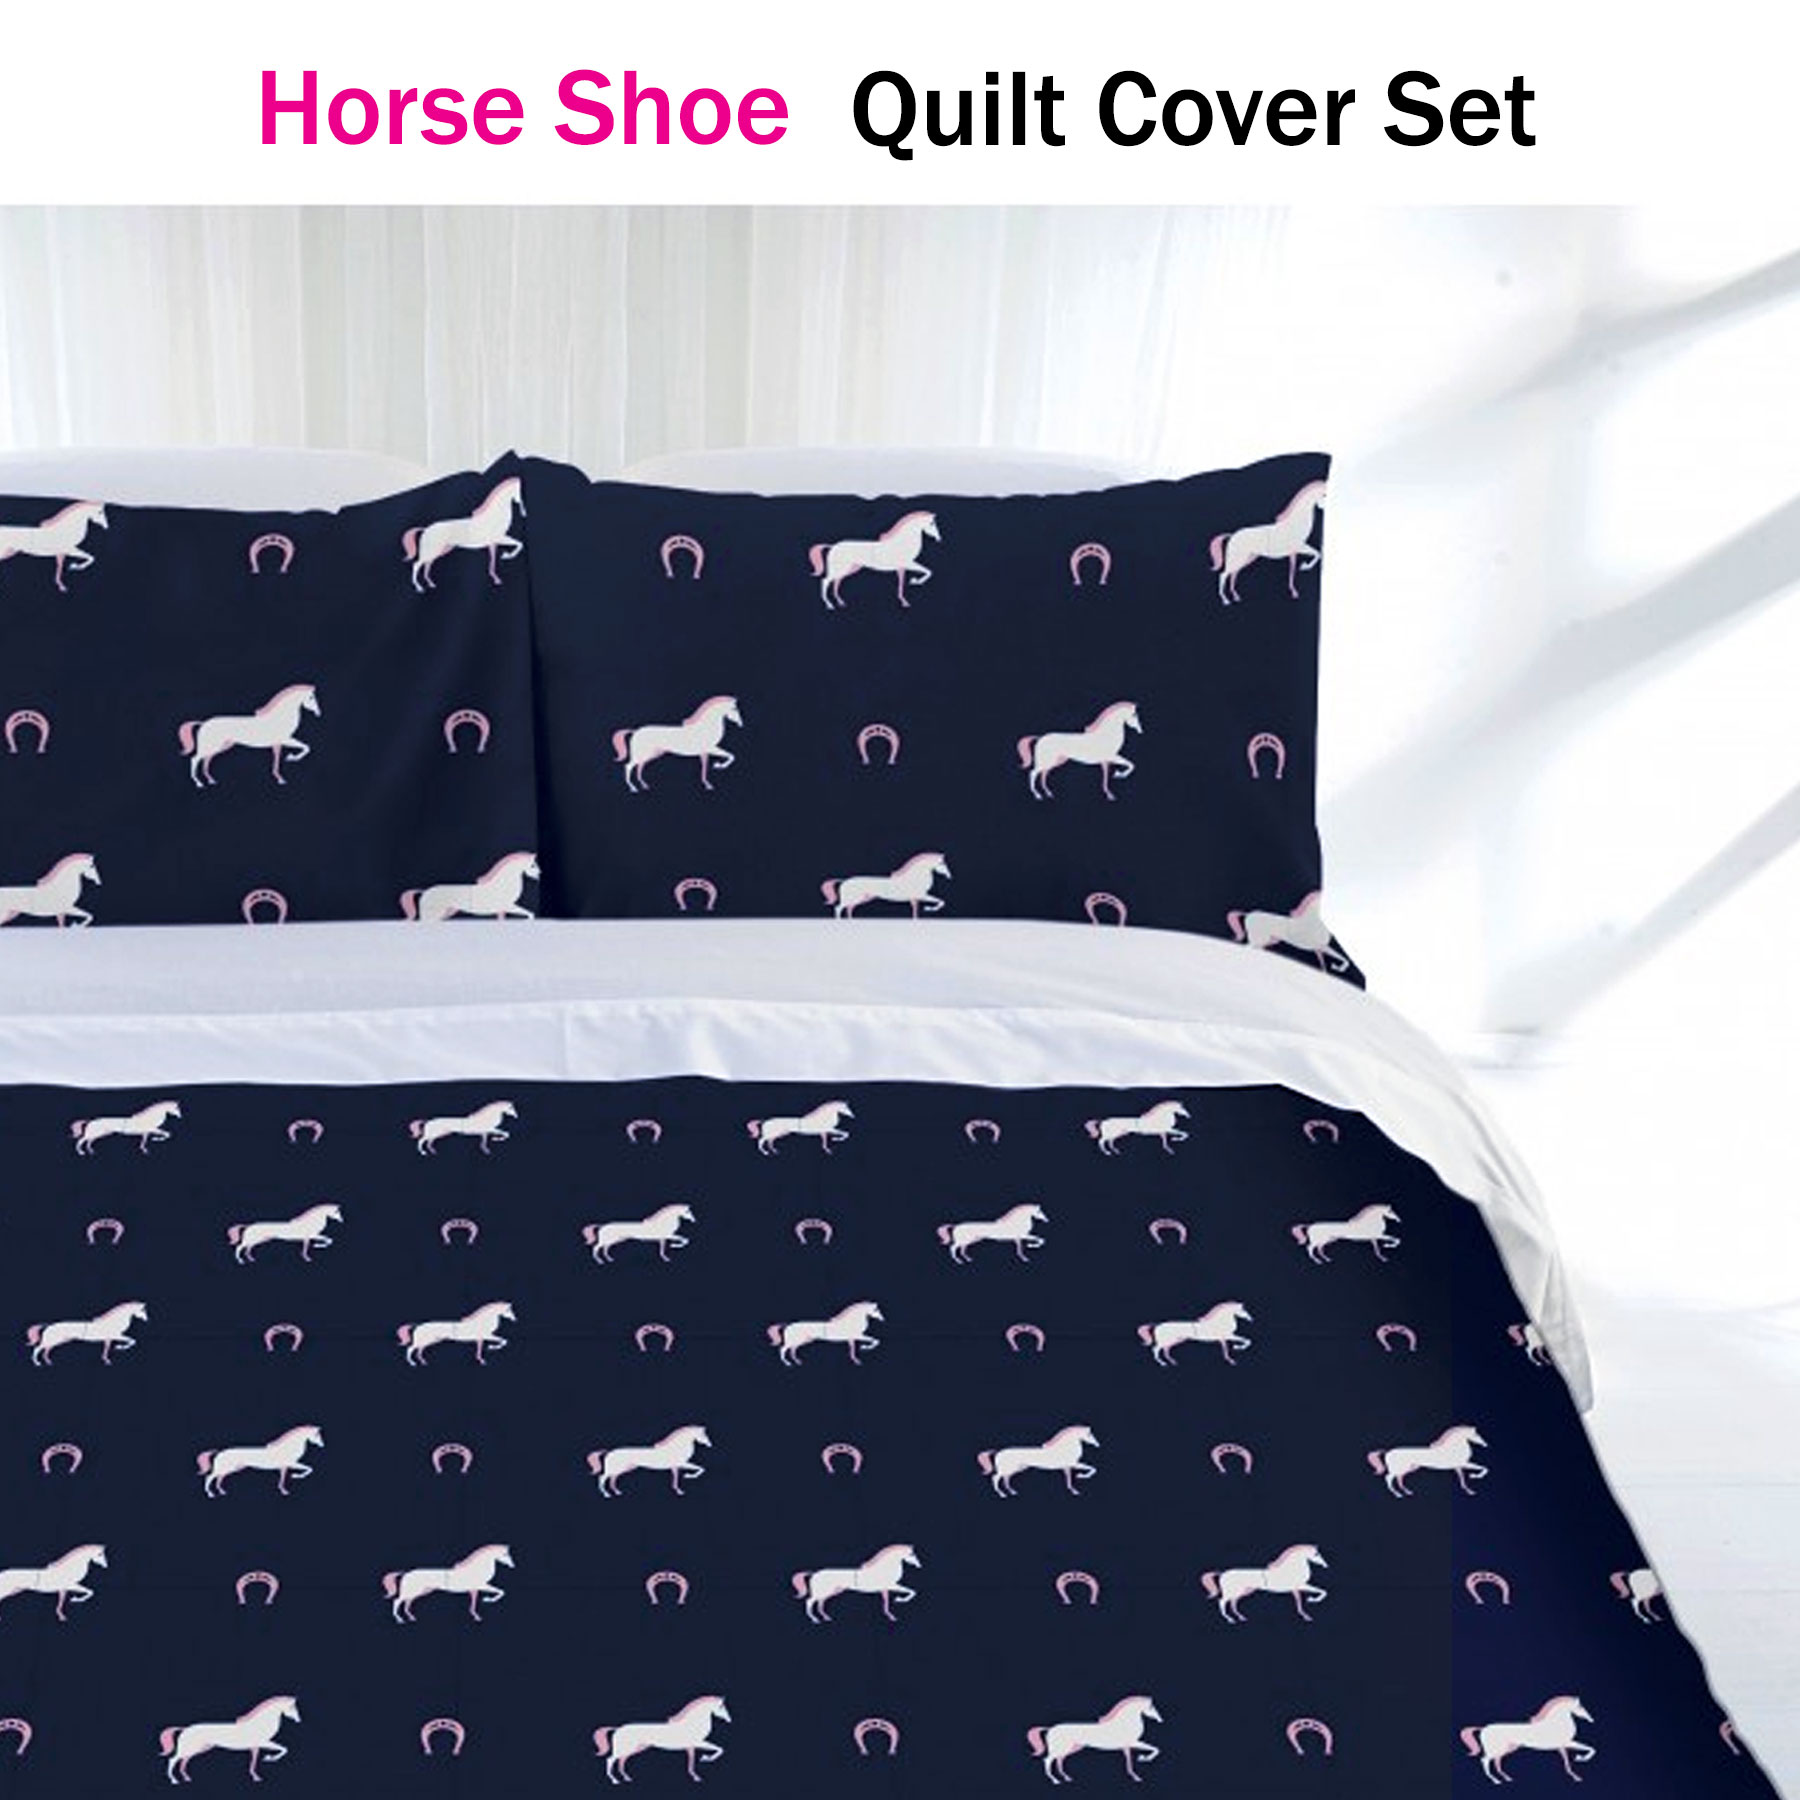 Horse Shoe Quilt Doona Duvet Cover Set By Just Home Single